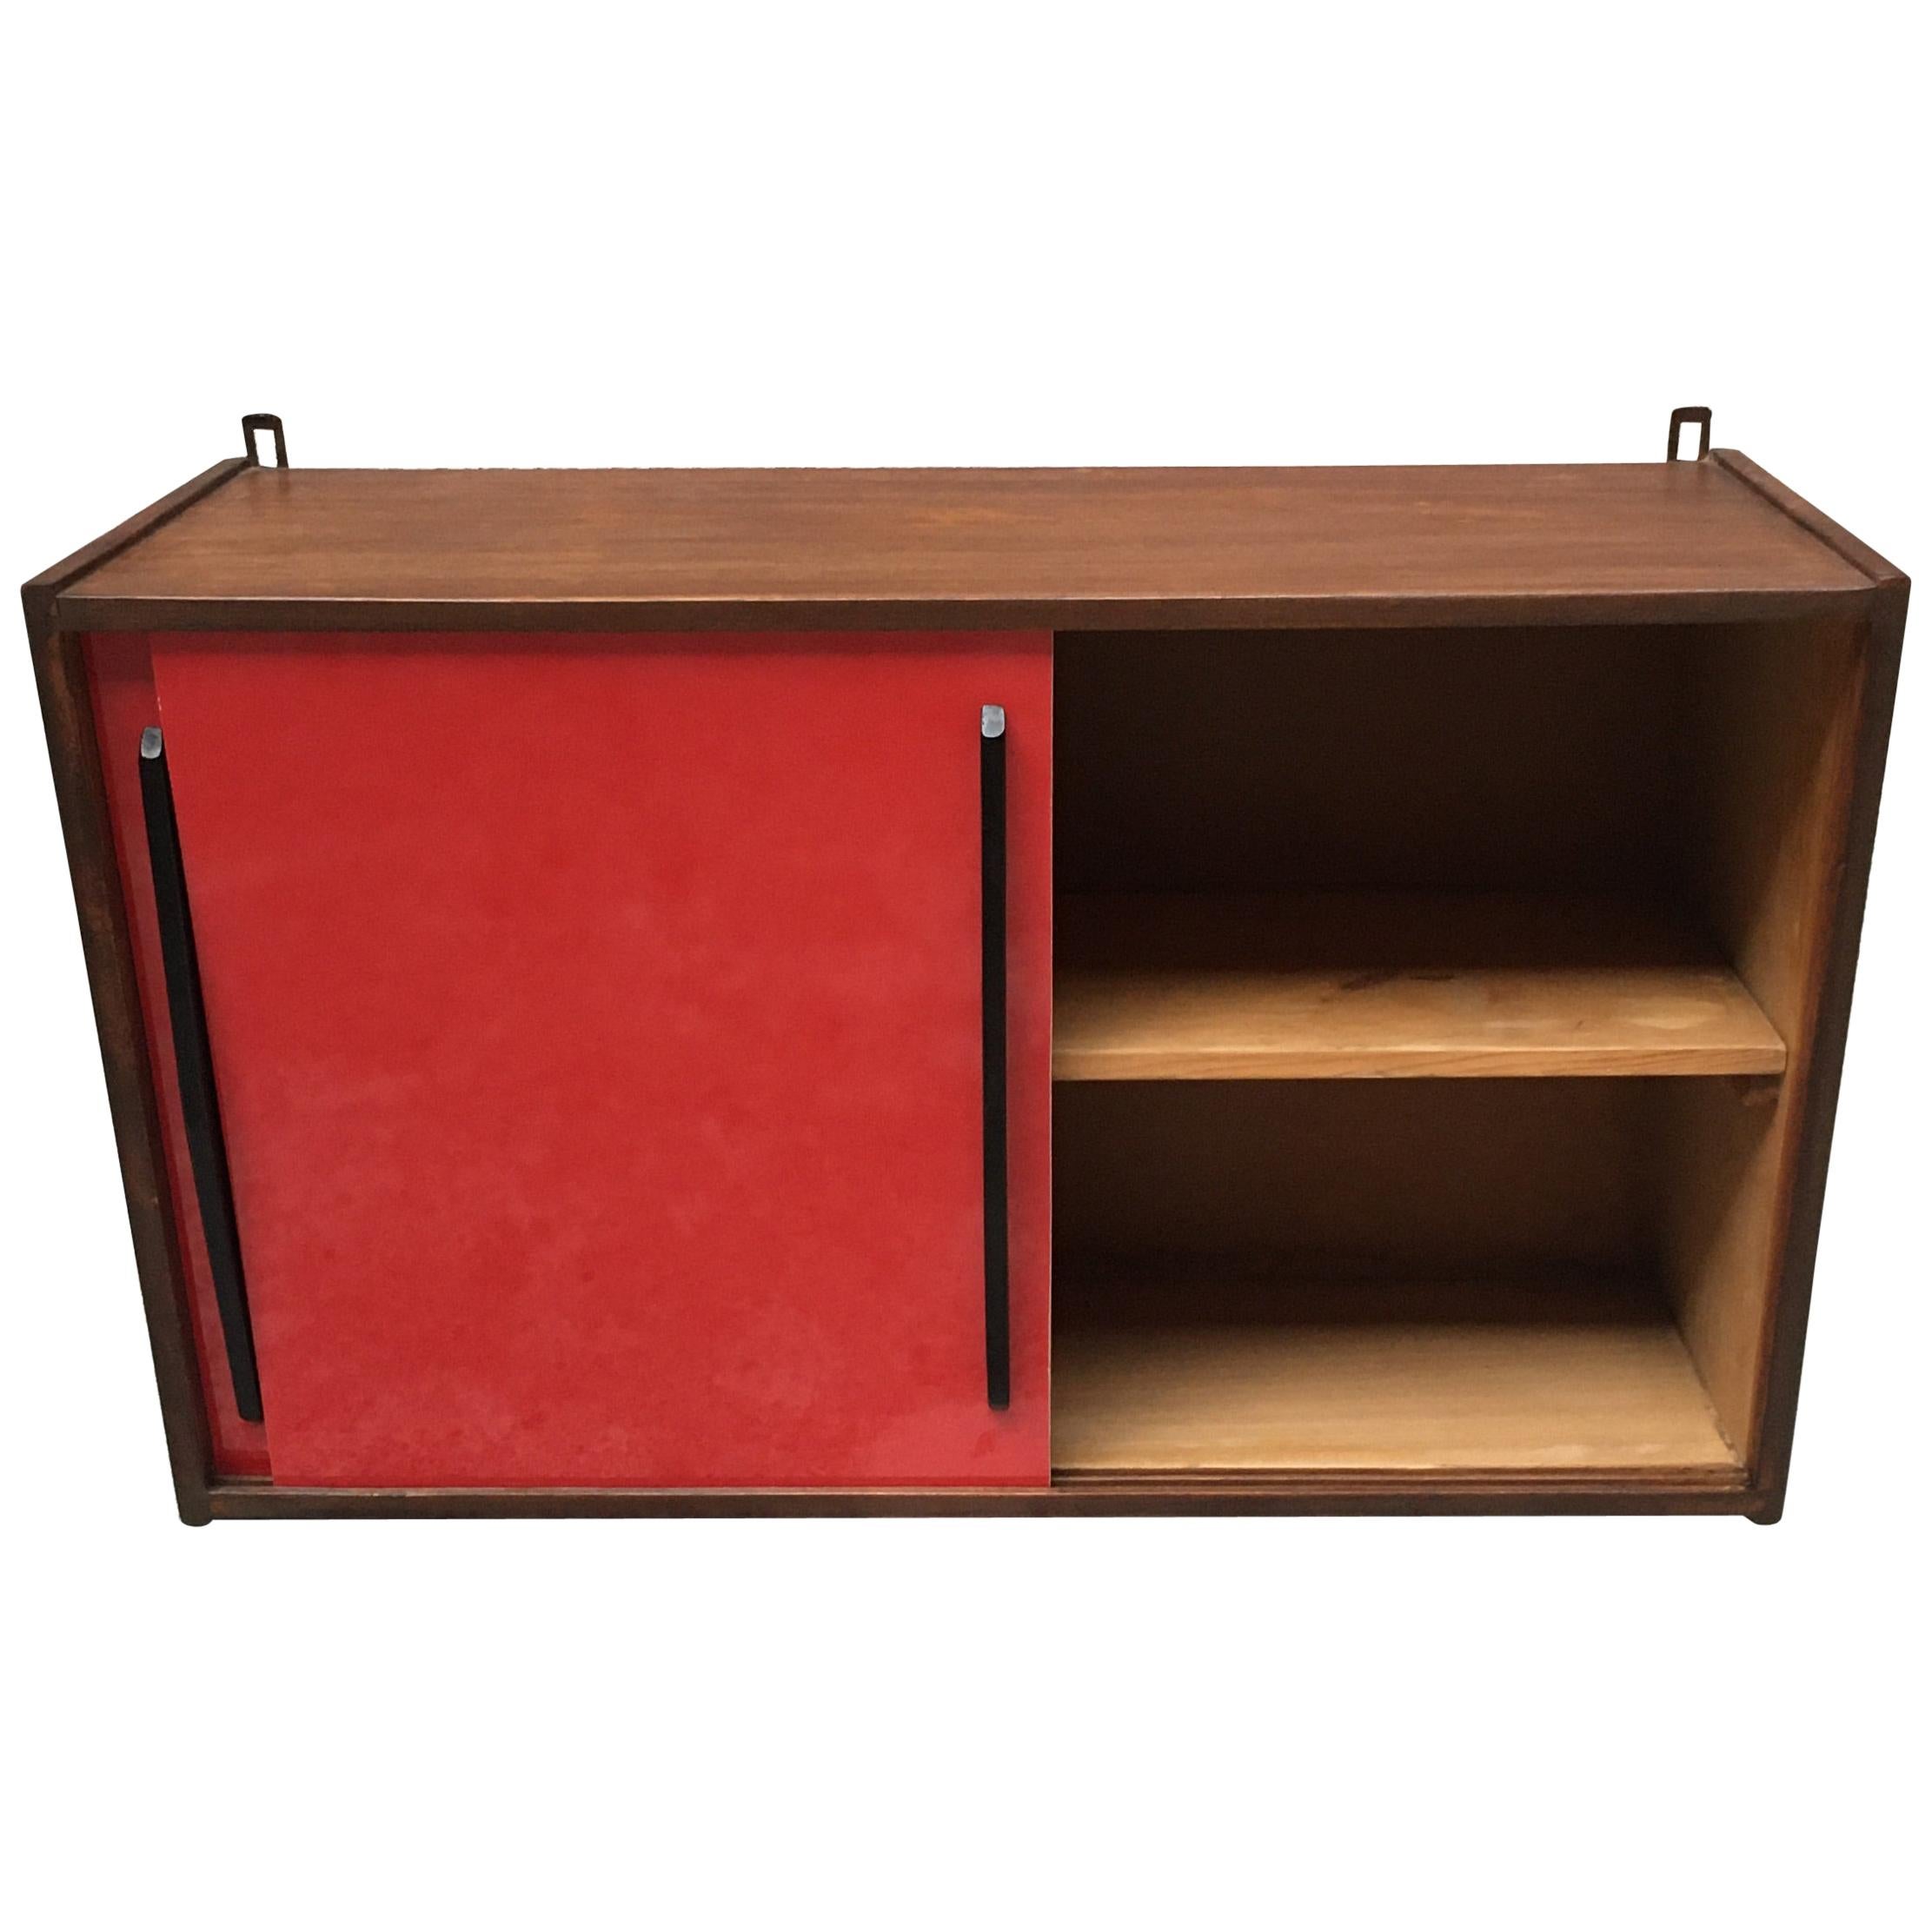 Italian Glossy Red Formica and Black Wood Kitchen Wall Unit, 1960s